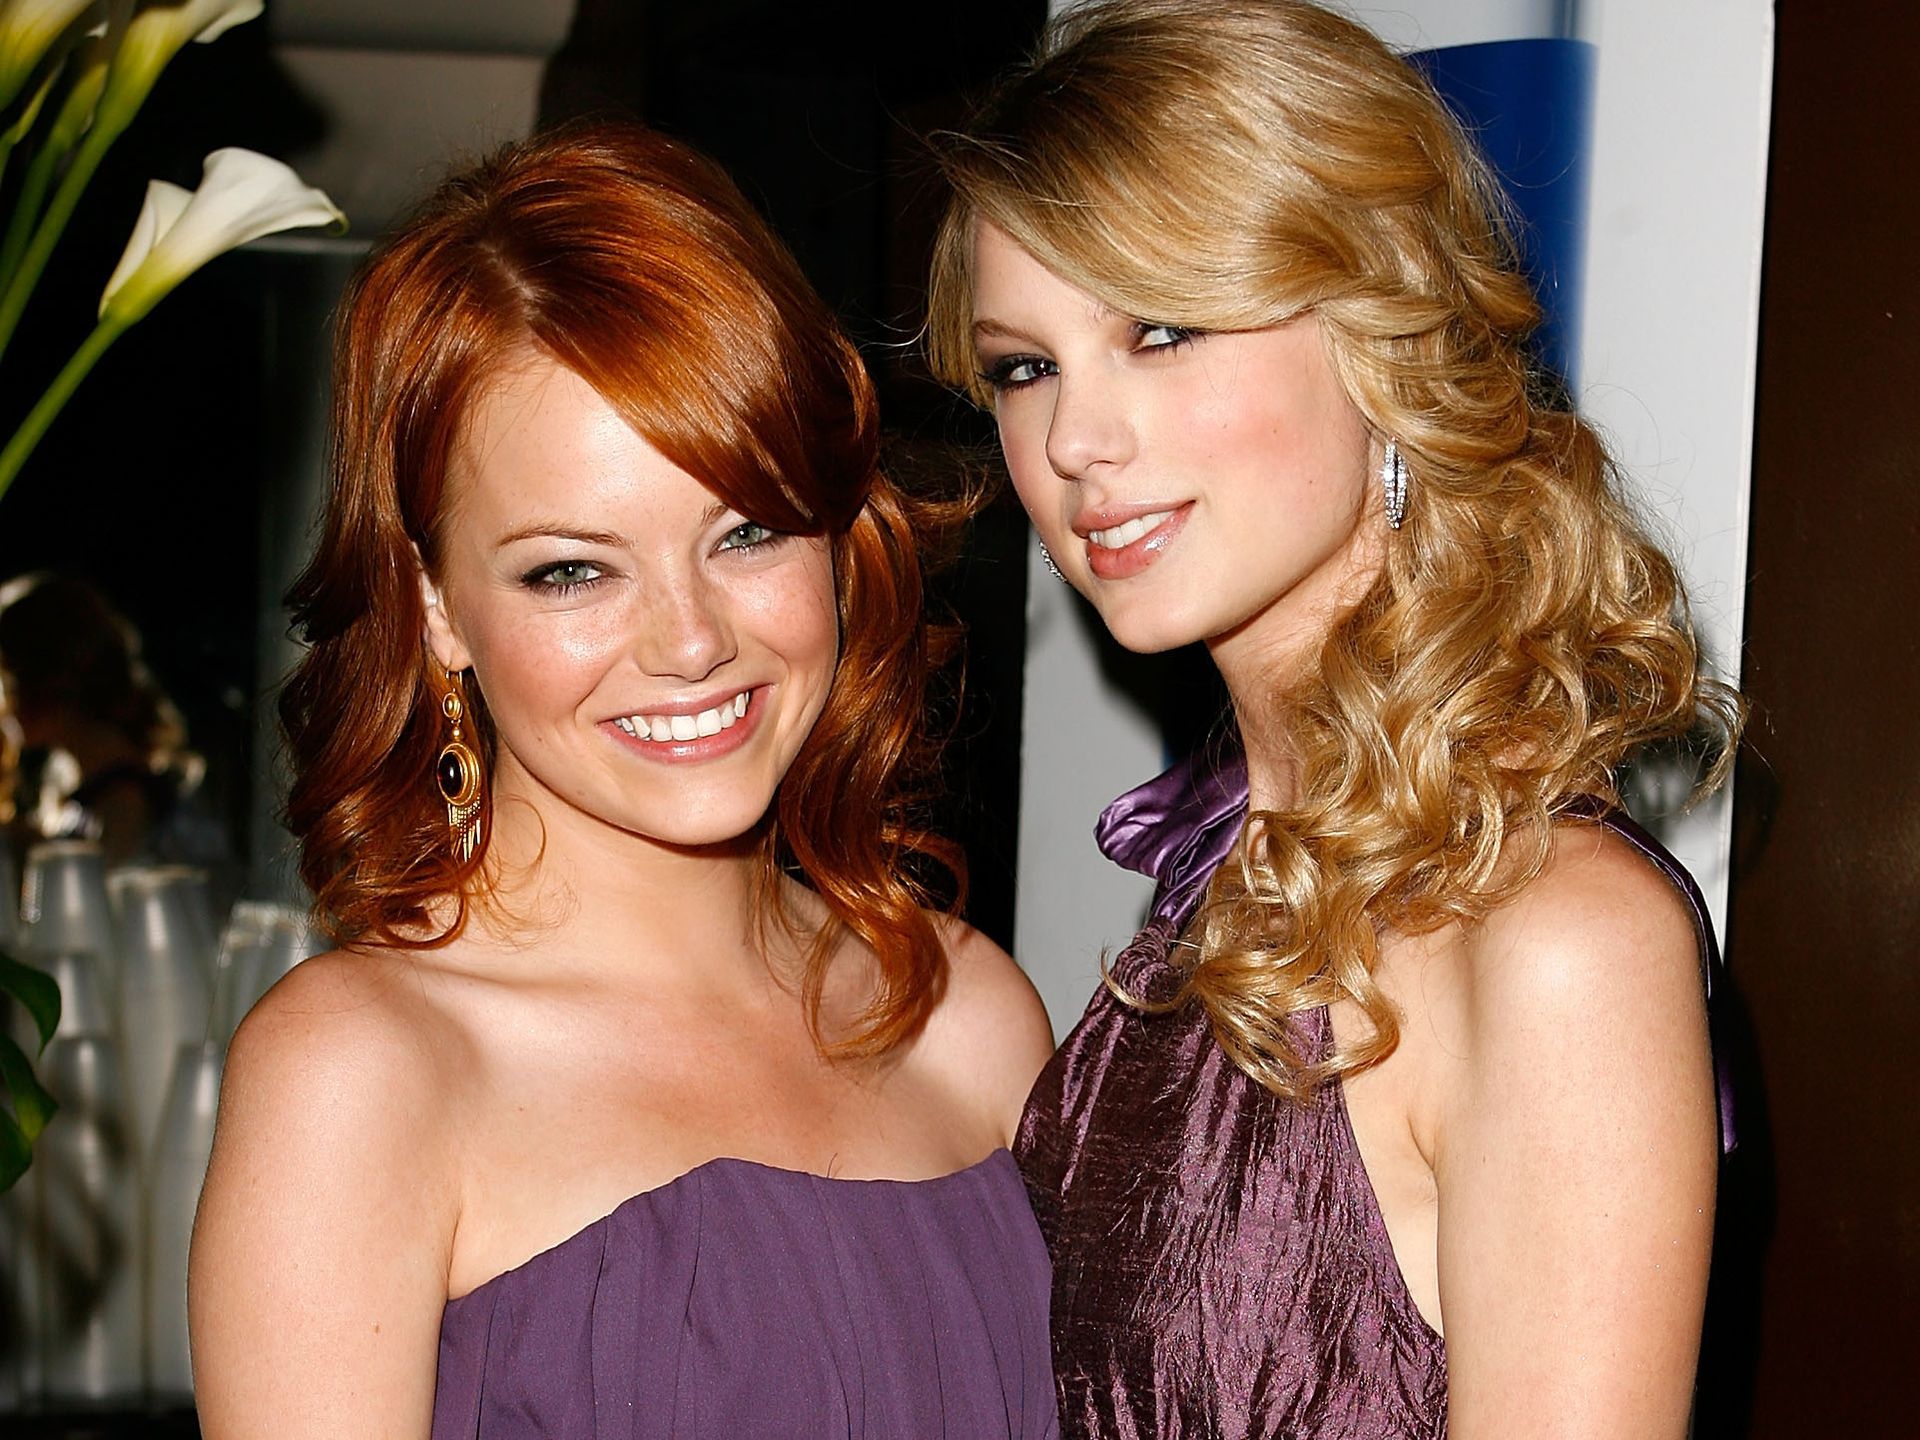 Is Taylor Swift's When Emma Falls in Love About Emma Stone